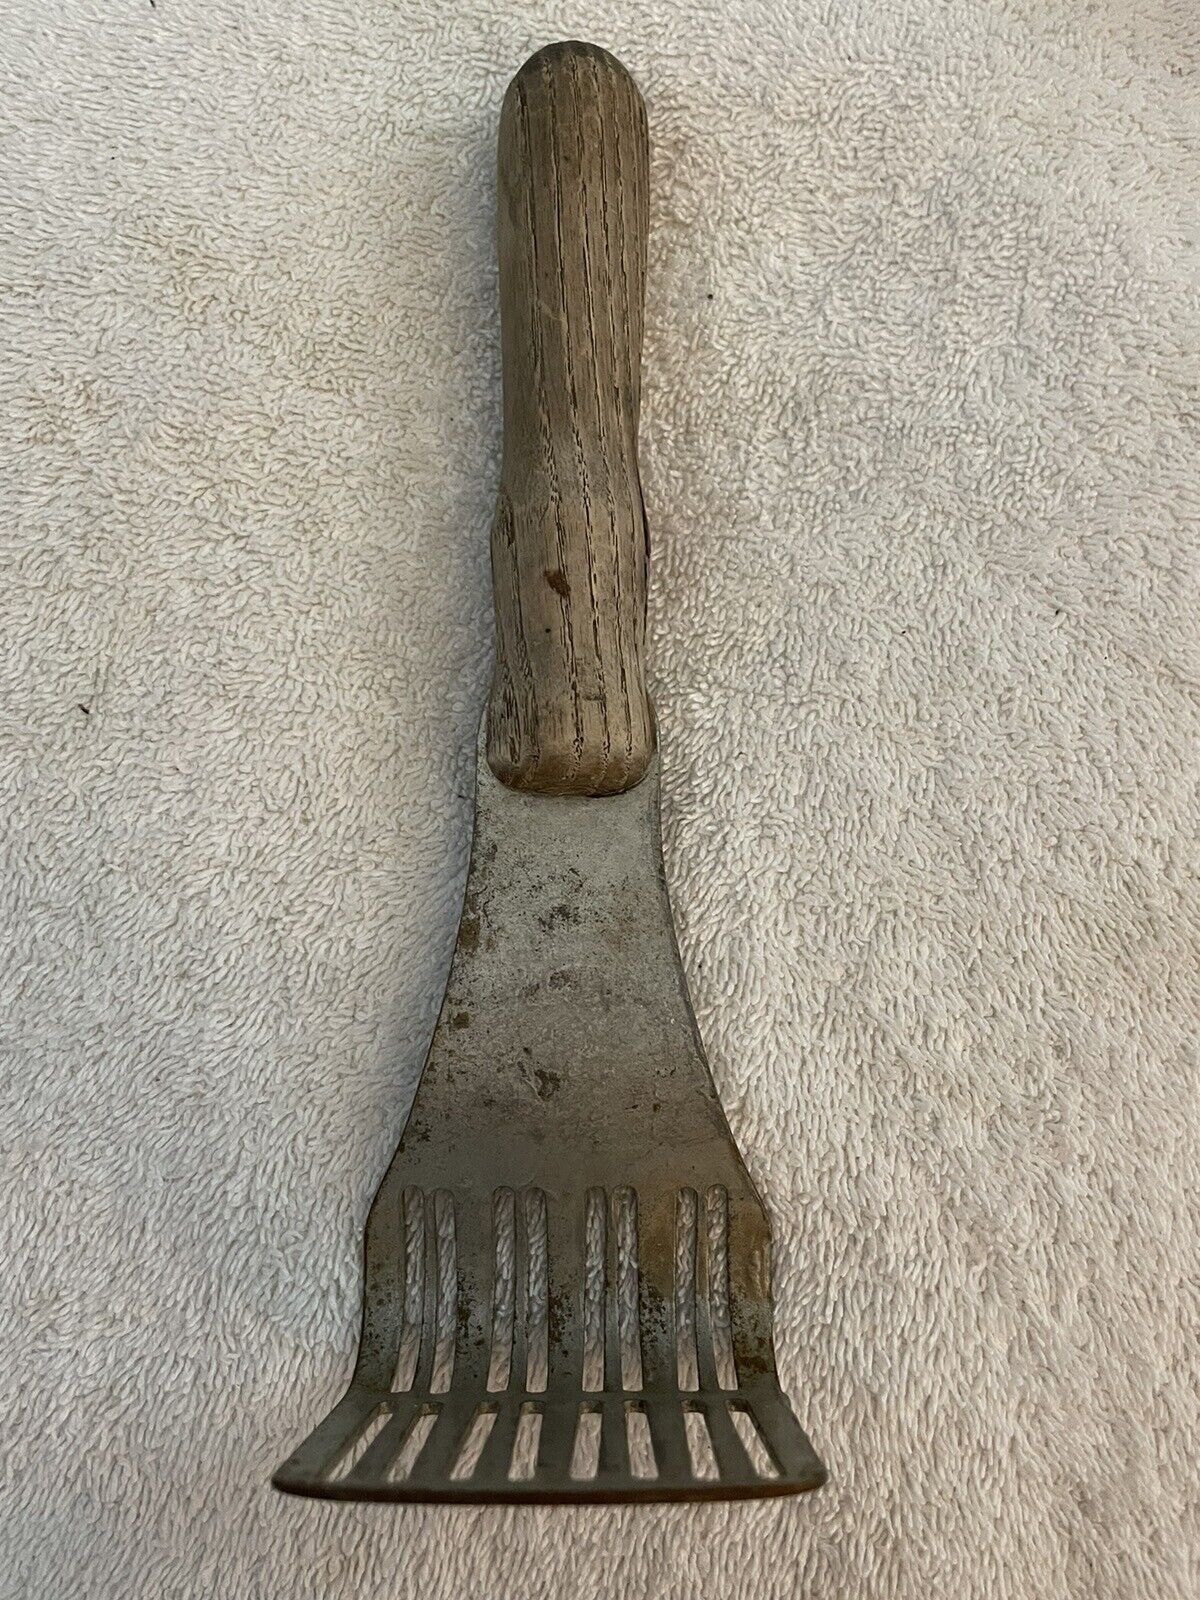 Antique Androck Potato Ricer Kitchen Tool With Wood Handle Vegetable Masher 9”